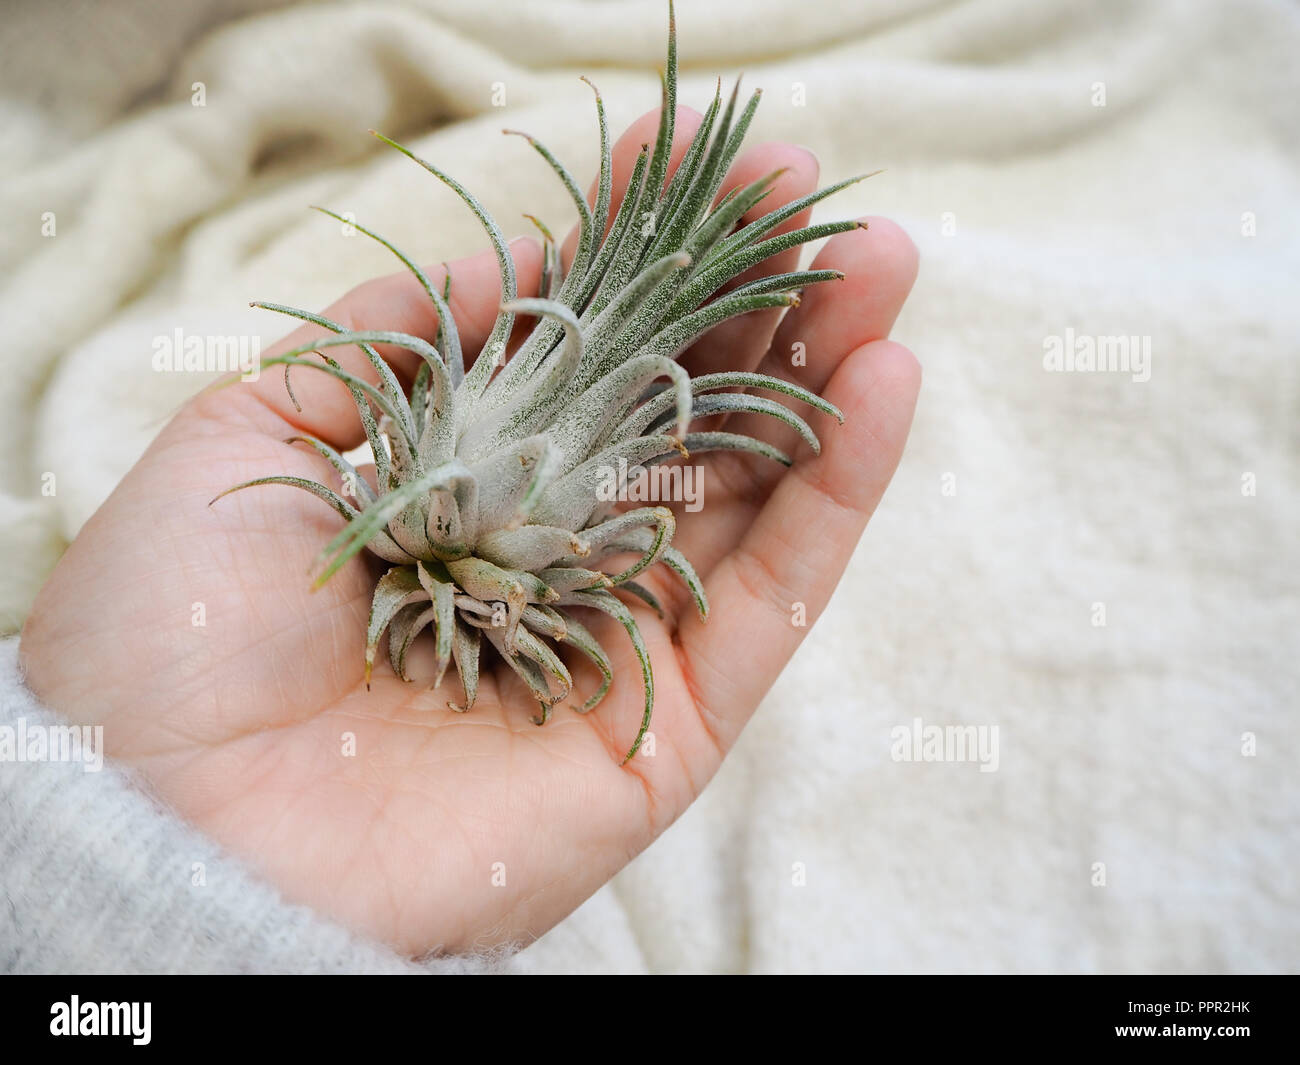 Hand holding a tillandsia ionantha air plant against a white soft background Stock Photo